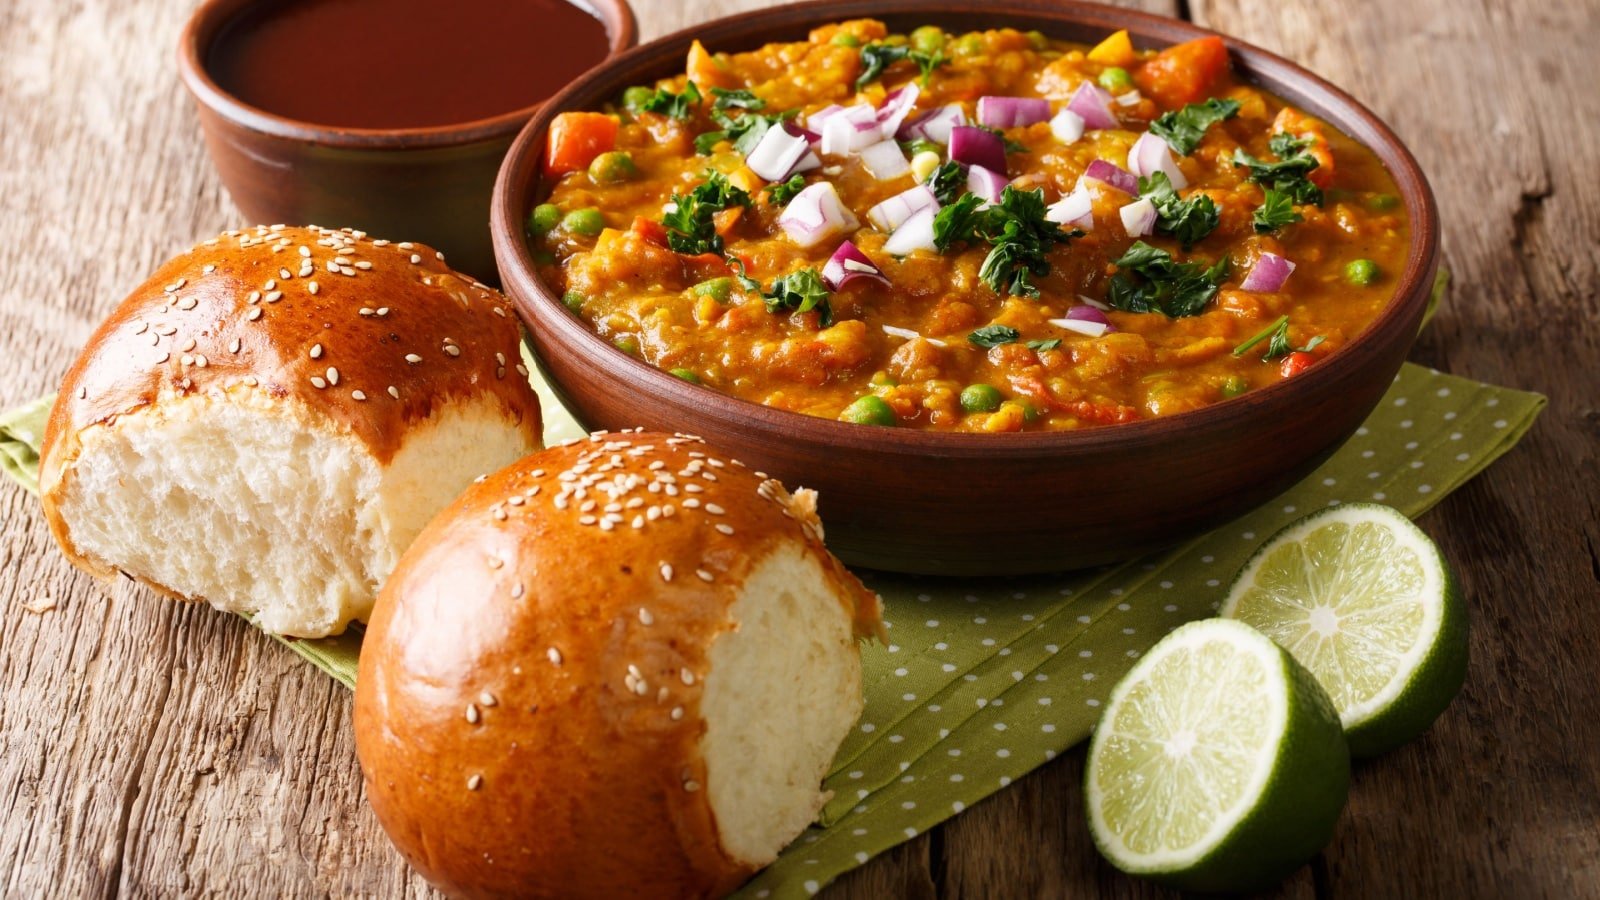 <p><span>Next stop: India. Pav Bhaji is a popular street food that originated in Mumbai and has now spread to every corner of the country. This spicy vegetable curry served with buttered buns is a burst of flavors that will tantalize your taste buds and leave you wanting more.</span></p><p><span>Pav bhaji is not just a food; it’s an emotion that brings comfort with every mouthful. The hearty mixture of mashed vegetables cooked with aromatic spices and served with warm, butter-laden buns is truly an experience beyond mere sustenance. It’s a bright, bustling symphony of flavors that mirrors the vibrant spirit of Indian streets, making it an unmissable part of any culinary adventure in India.</span></p>